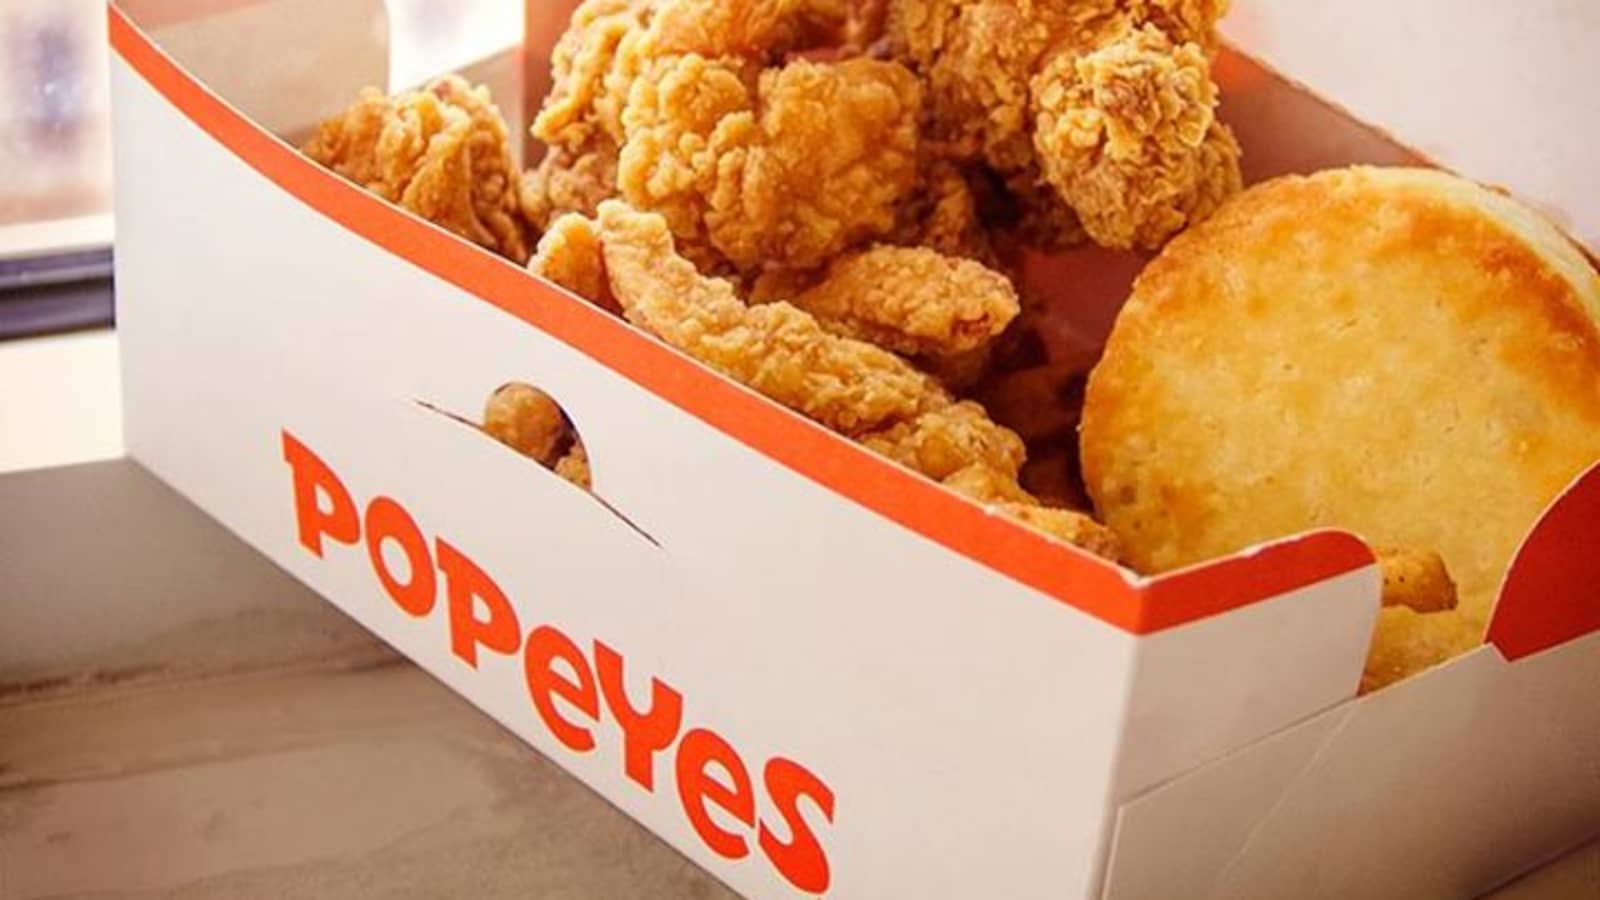 Restaurant Brands In Deal To Acquire Popeyes Louisiana Kitchen For 18 Billion